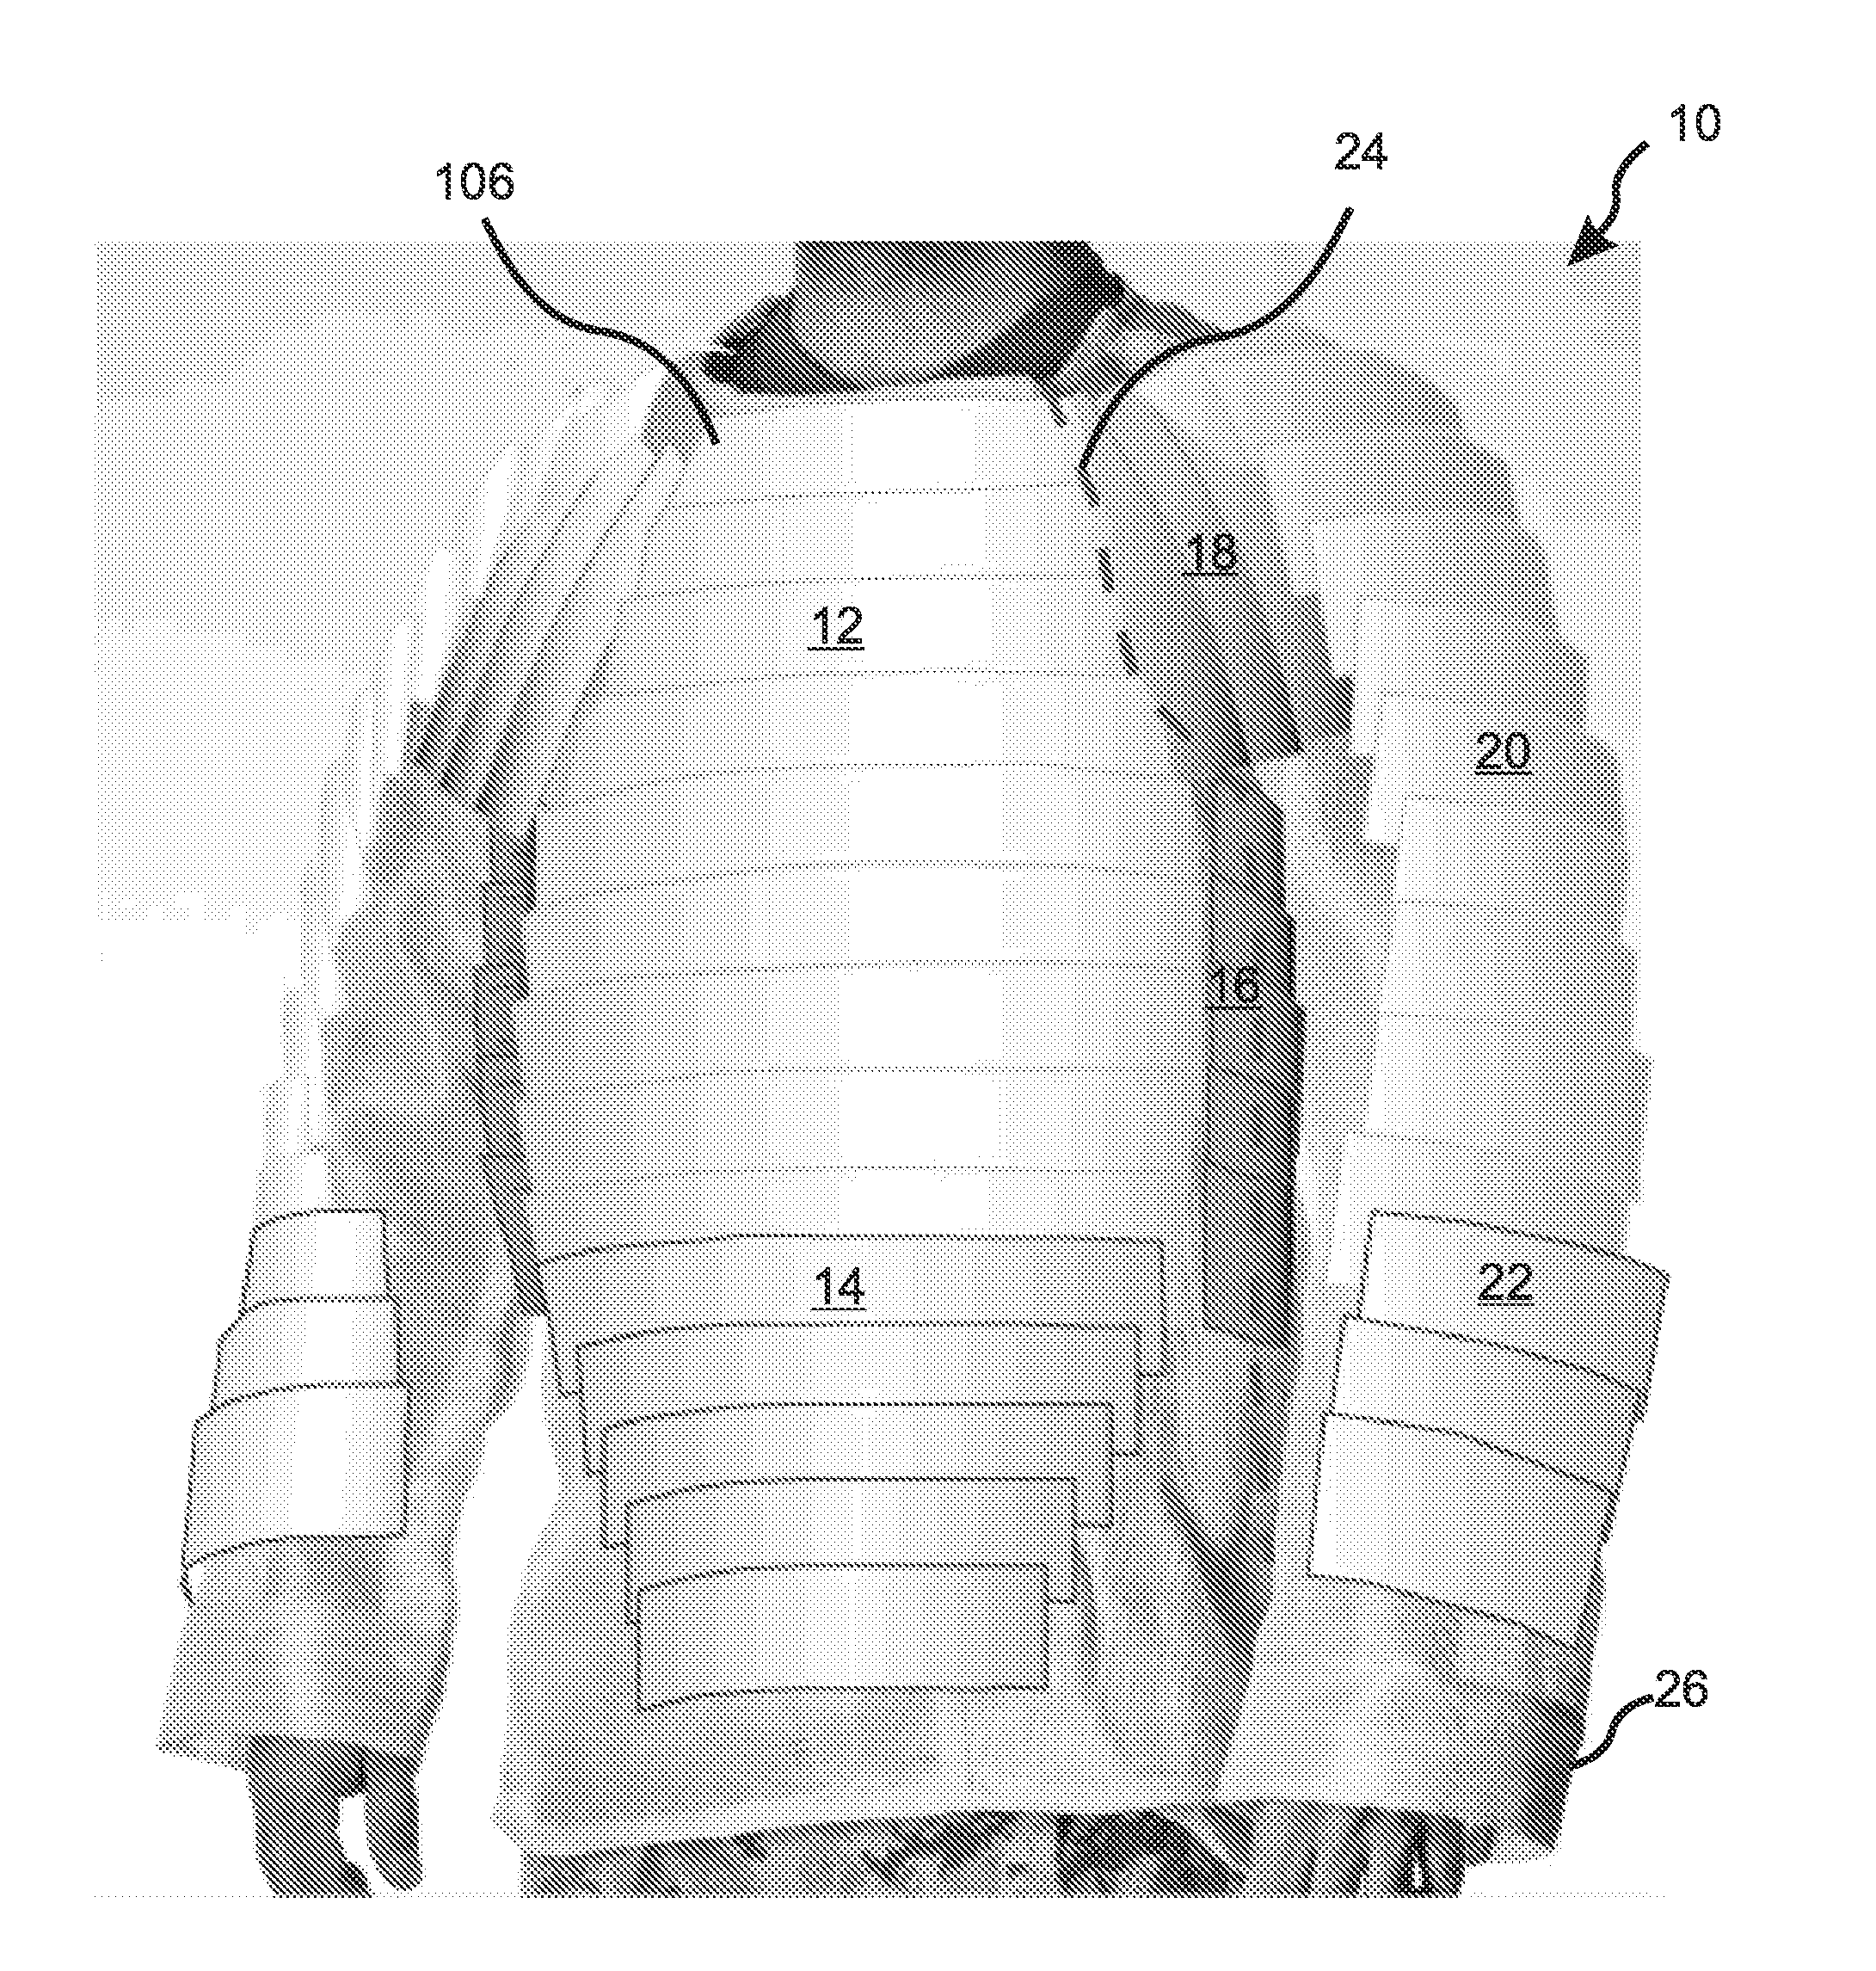 Thermally vented body armor